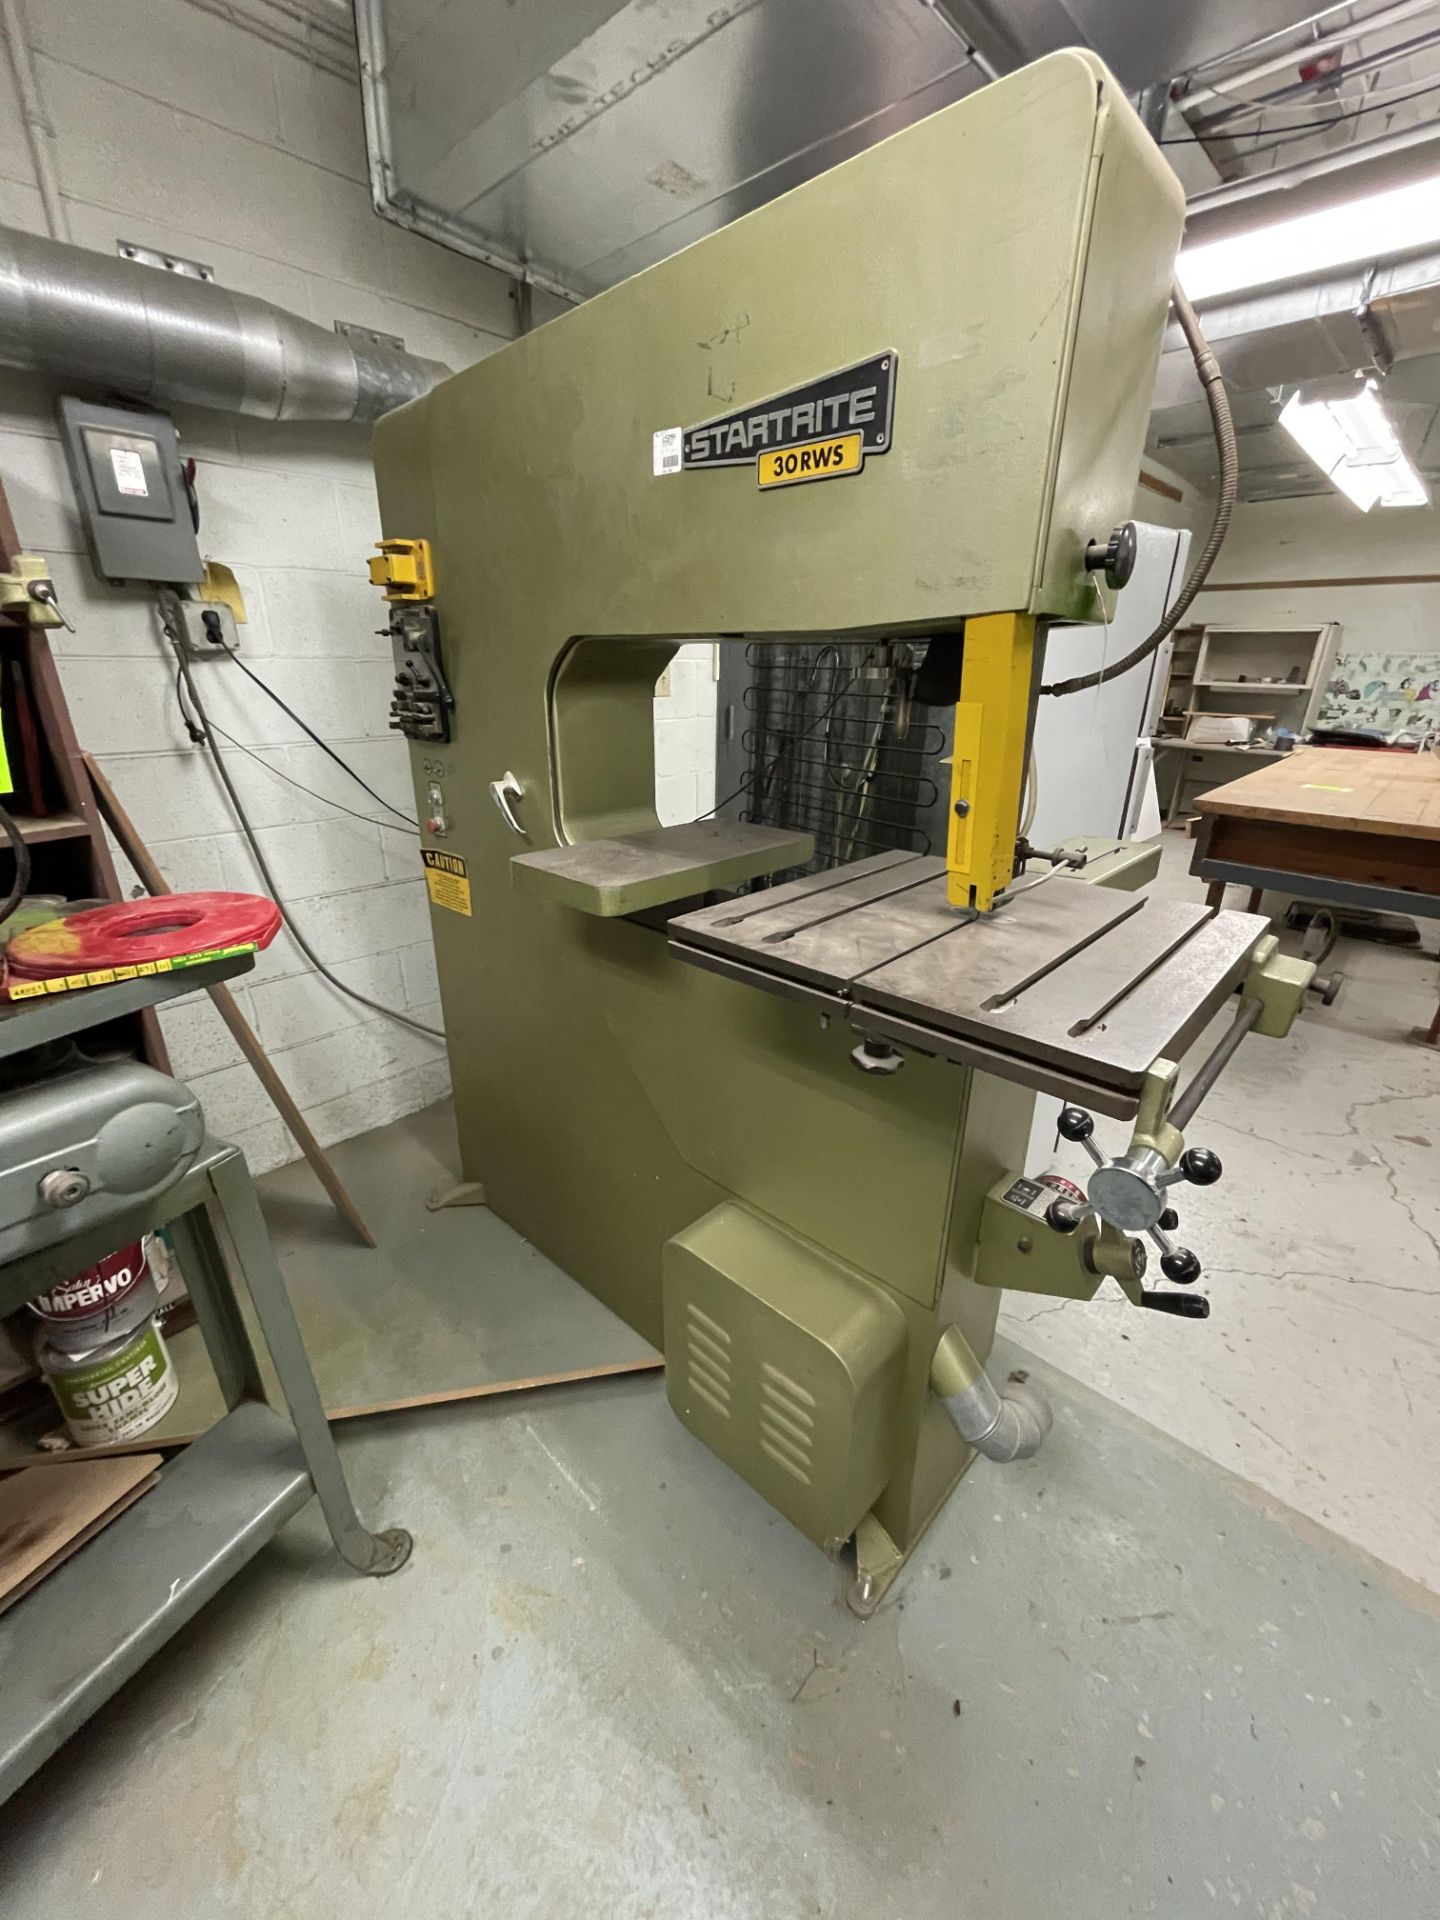 STARTRITE VERTICAL BANDSAW, MODEL 30RWS, S/N 90032, WITH STARTRITE WELDING UNITE BSO.25, S/N - Image 2 of 19